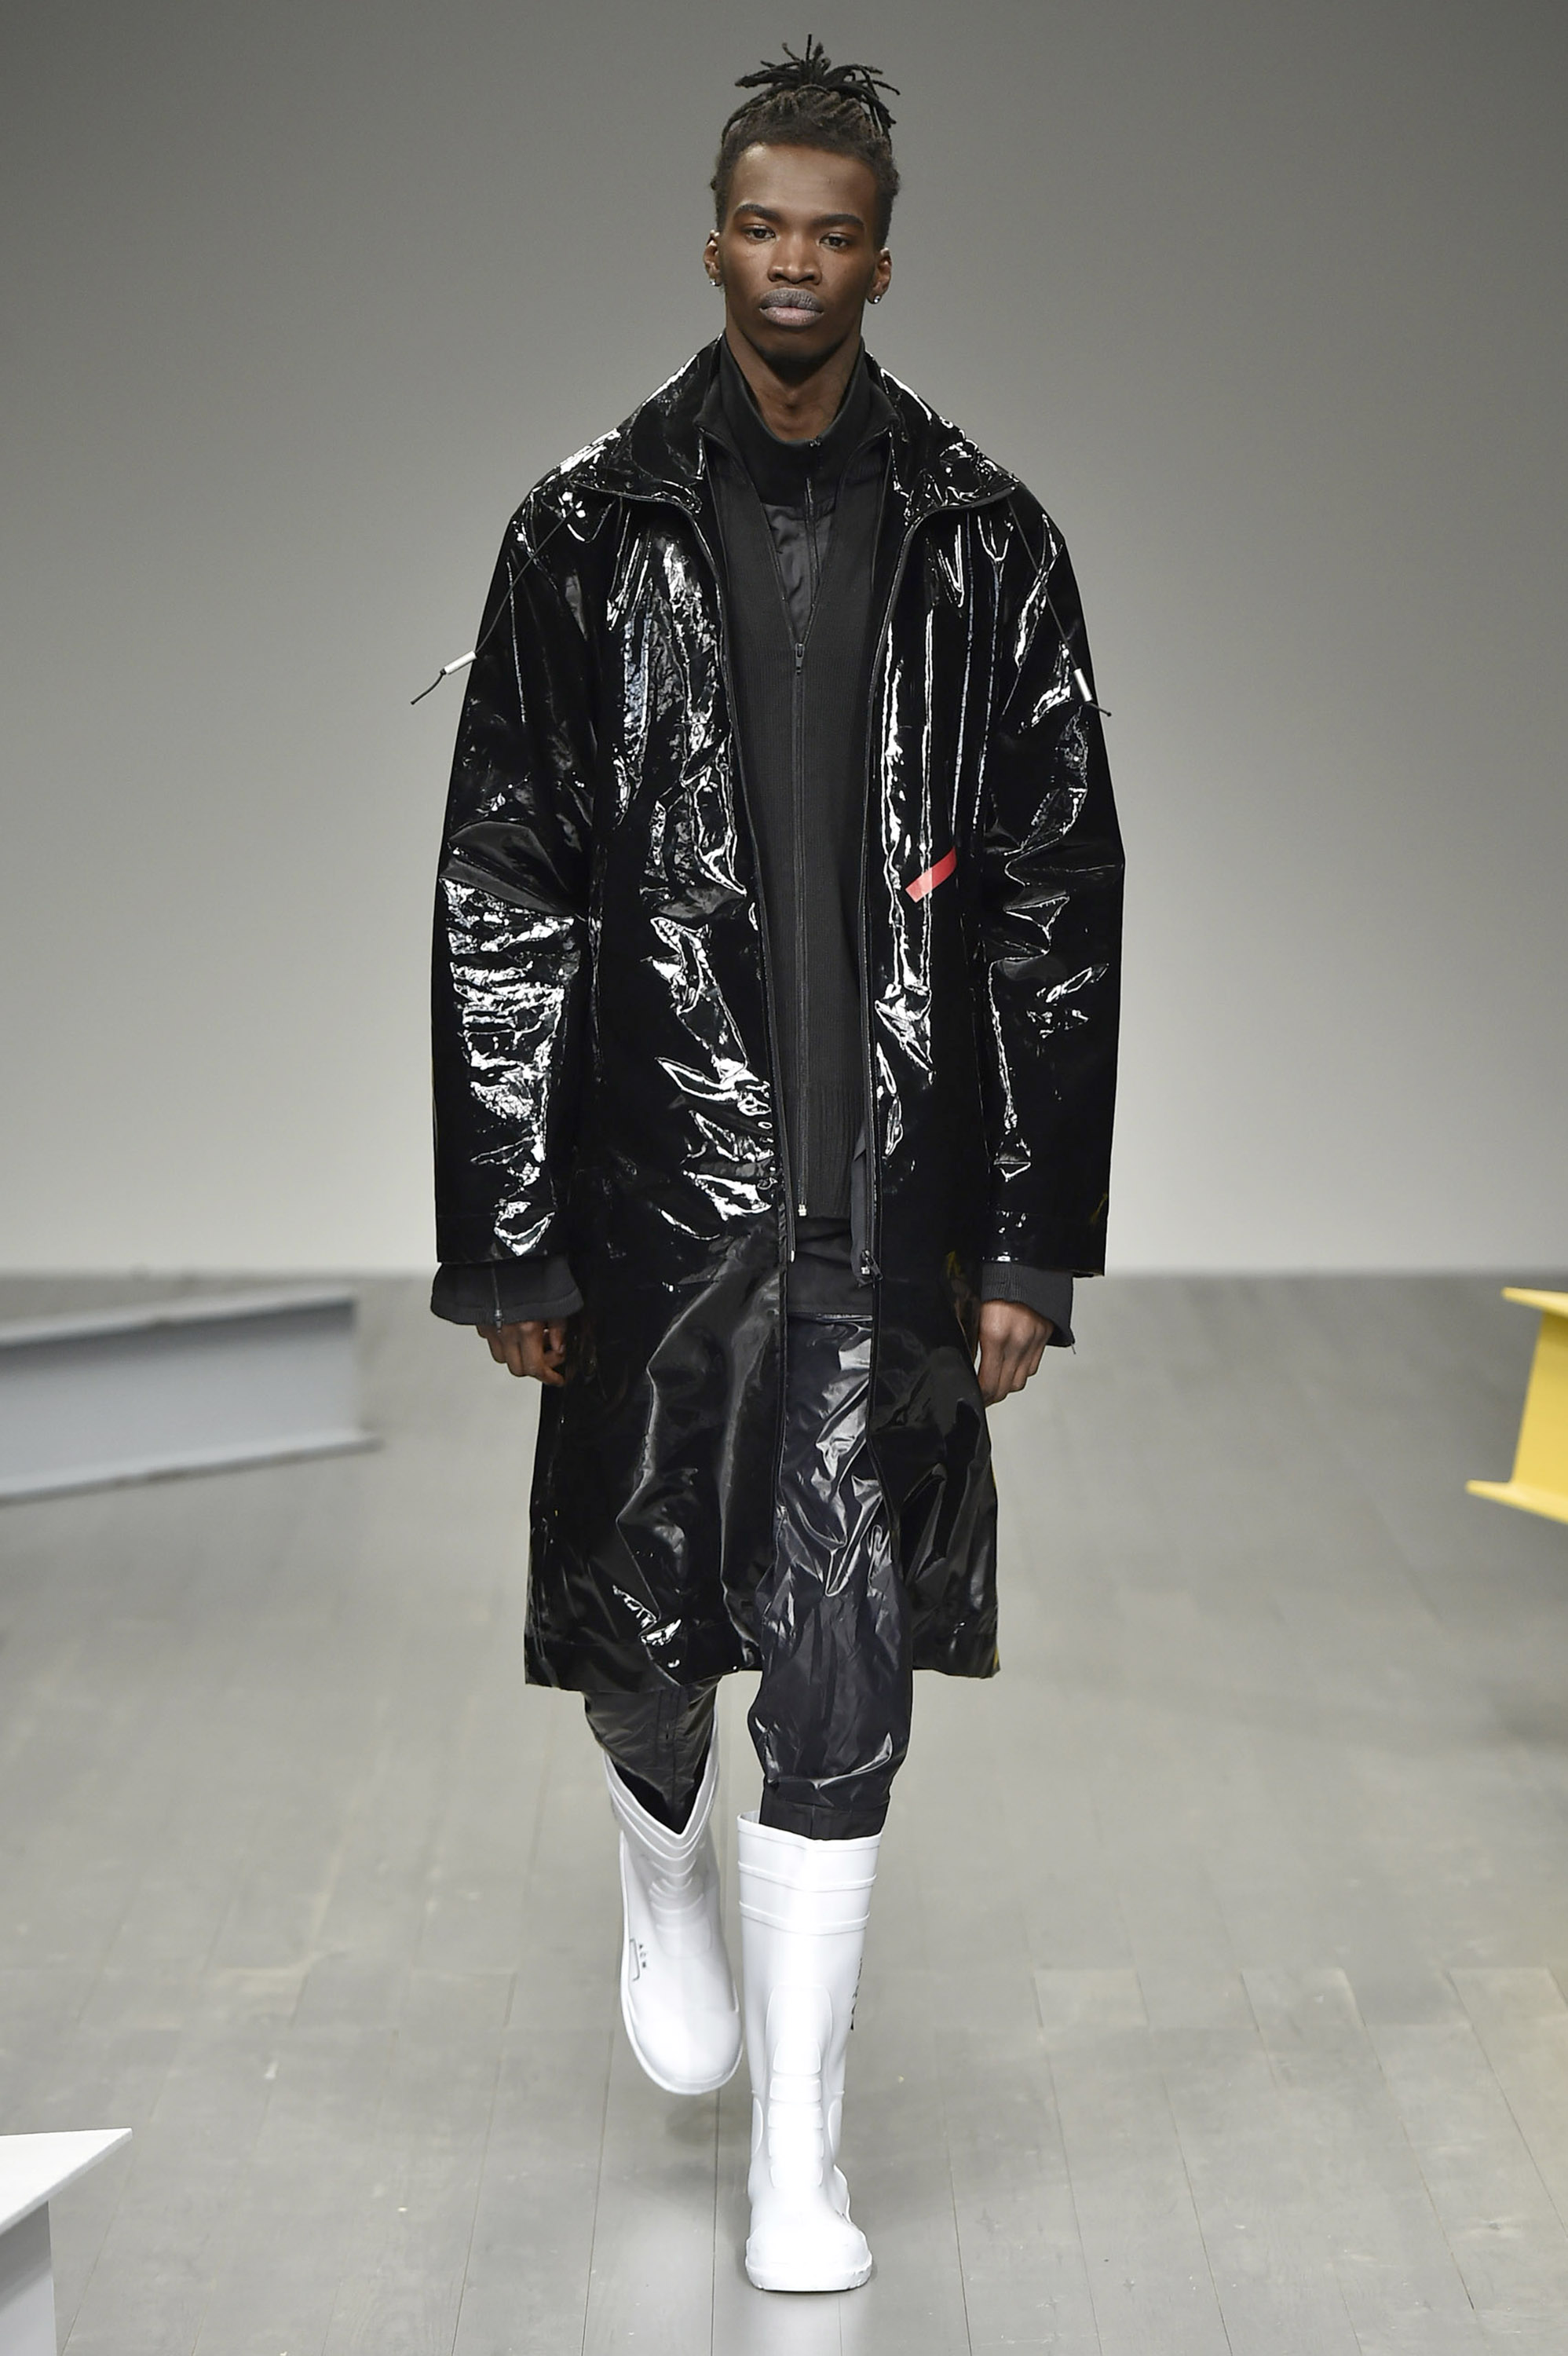 A-COLD-WALL* Makes Avant-garde Accessible For London Fashion Week Men’s AW18